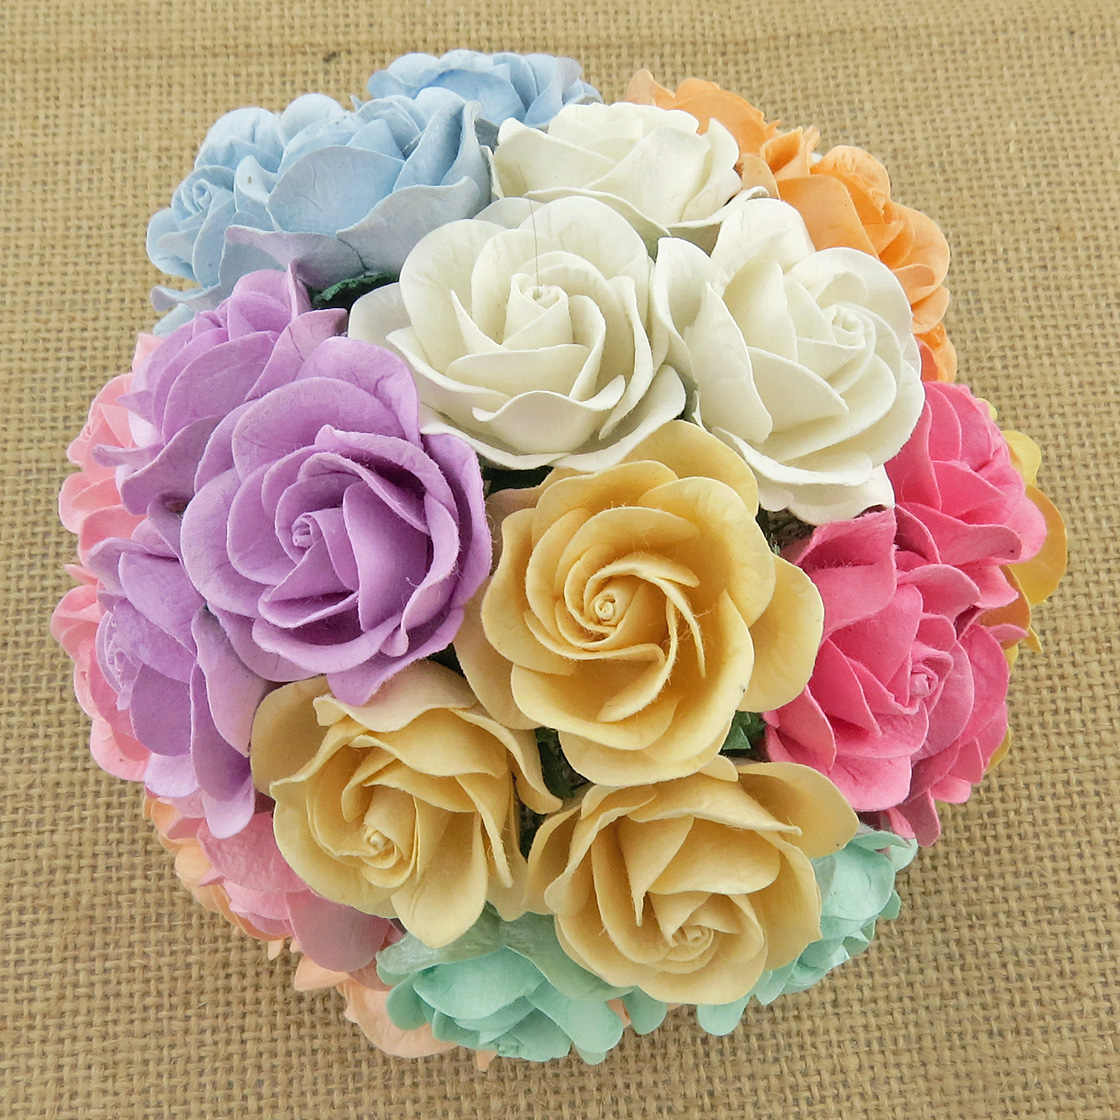 50 MIXED PASTEL MULBERRY PAPER TRELLIS ROSES - 10 COLOR